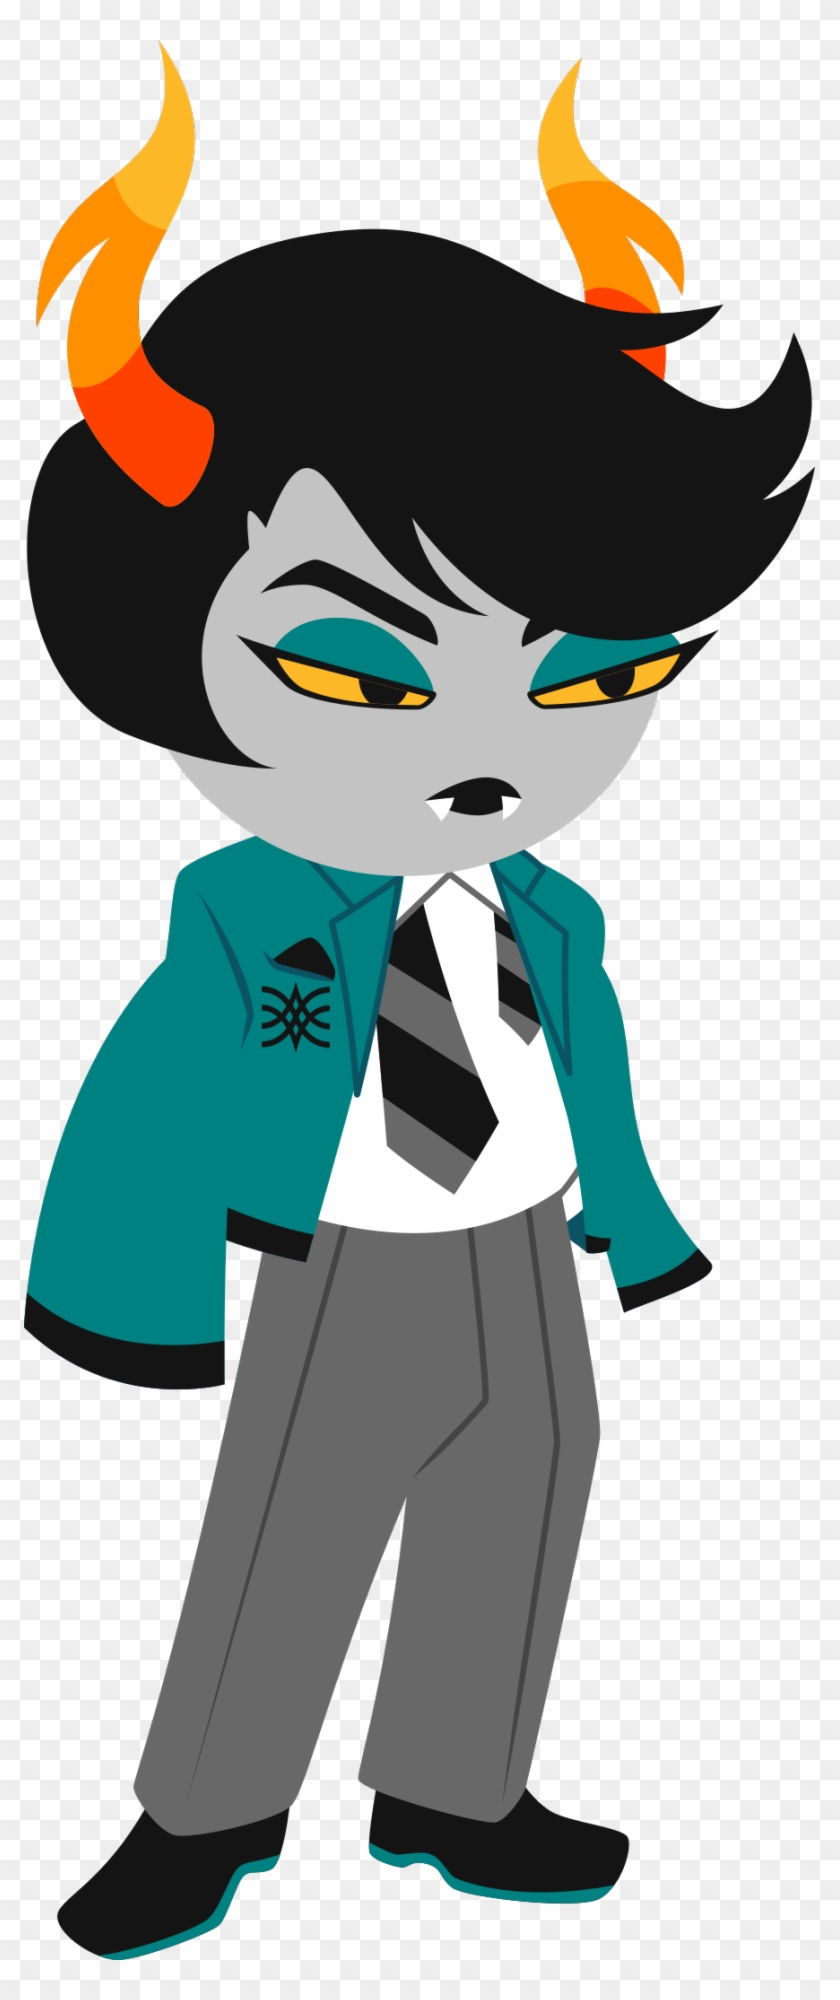 Does He Care That His Jackets Too Small For Him No - Lanque Hiveswap #1138858